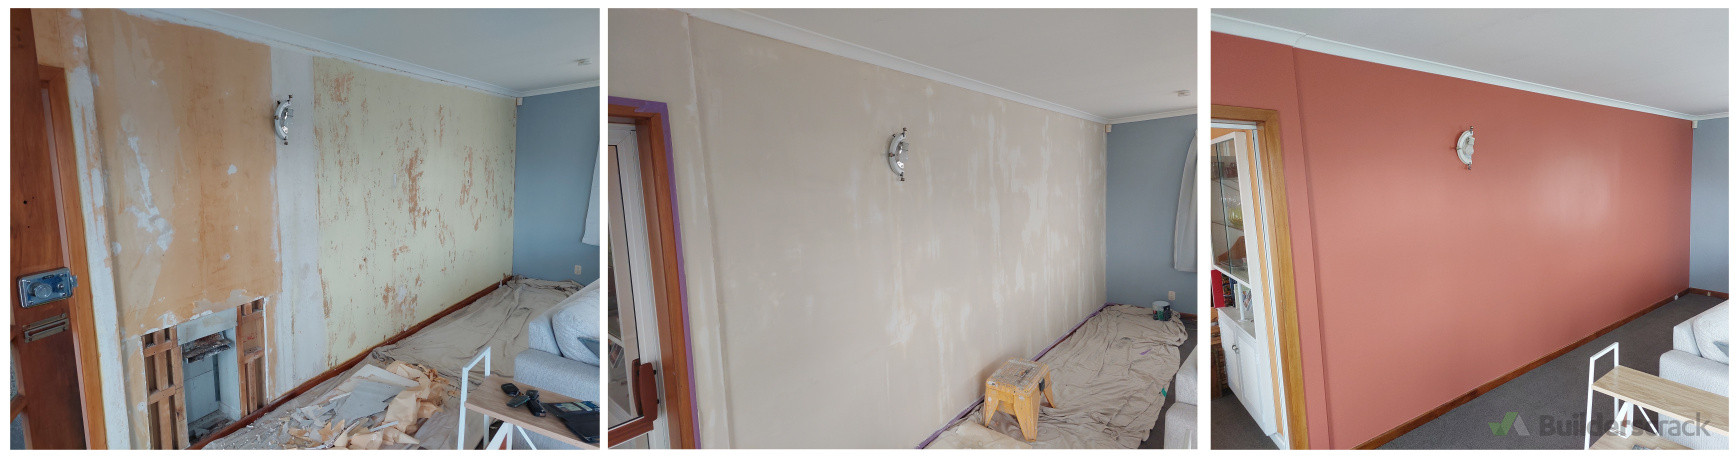 Wall repair, Plaster, Repaint (removal of gas fire)